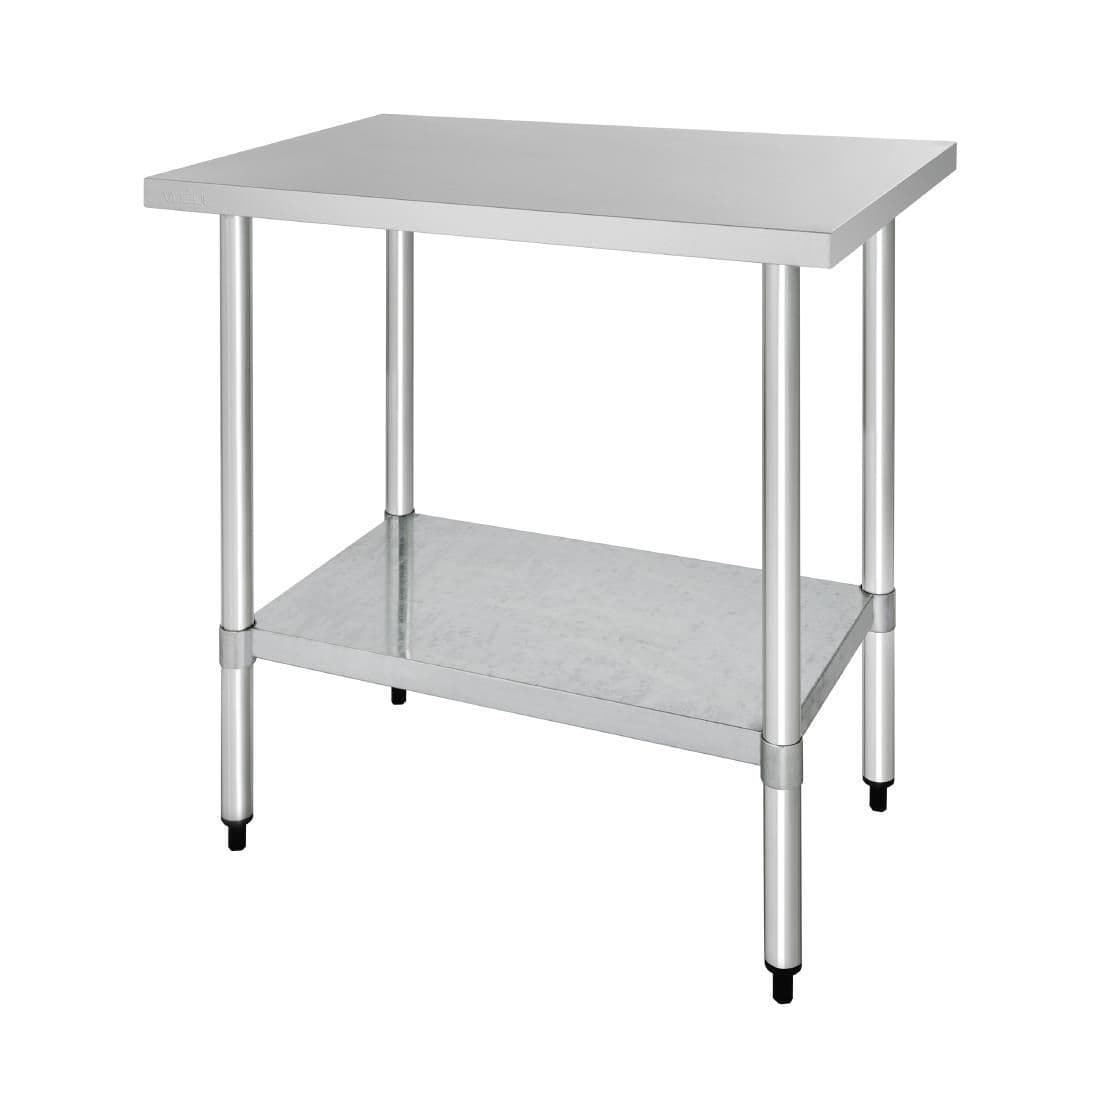 Vogue Stainless Steel Prep Table 900mm